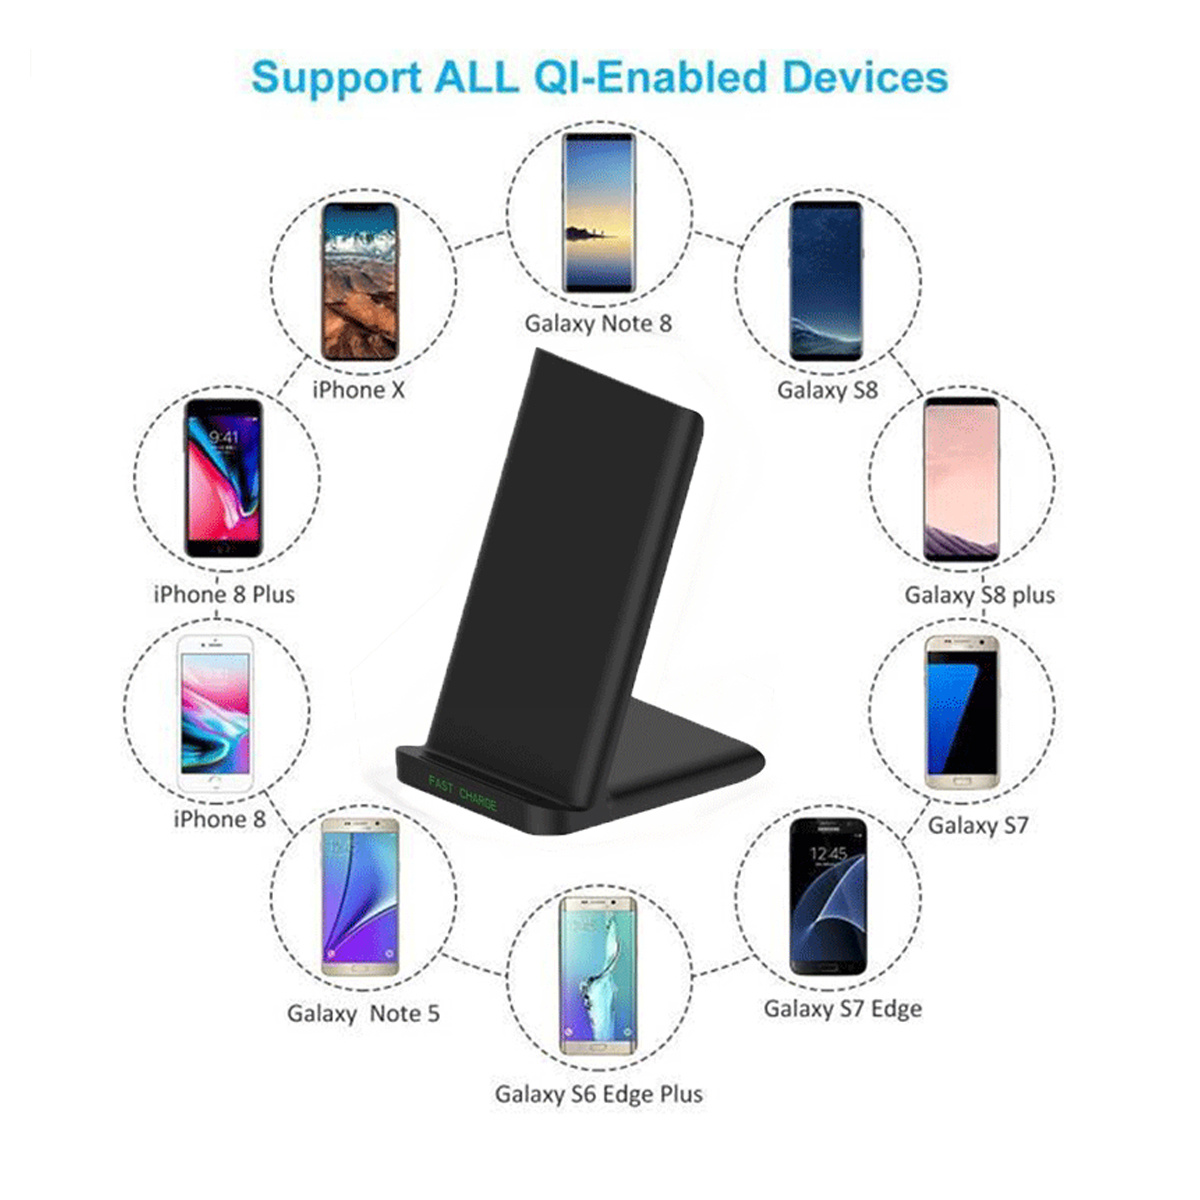 20W Qi Wireless Charger Fast Charging Phone Holder Stand For Qi-enabled Smart Phone For iPhone 11 Pro Max For Samsung Galaxy 20